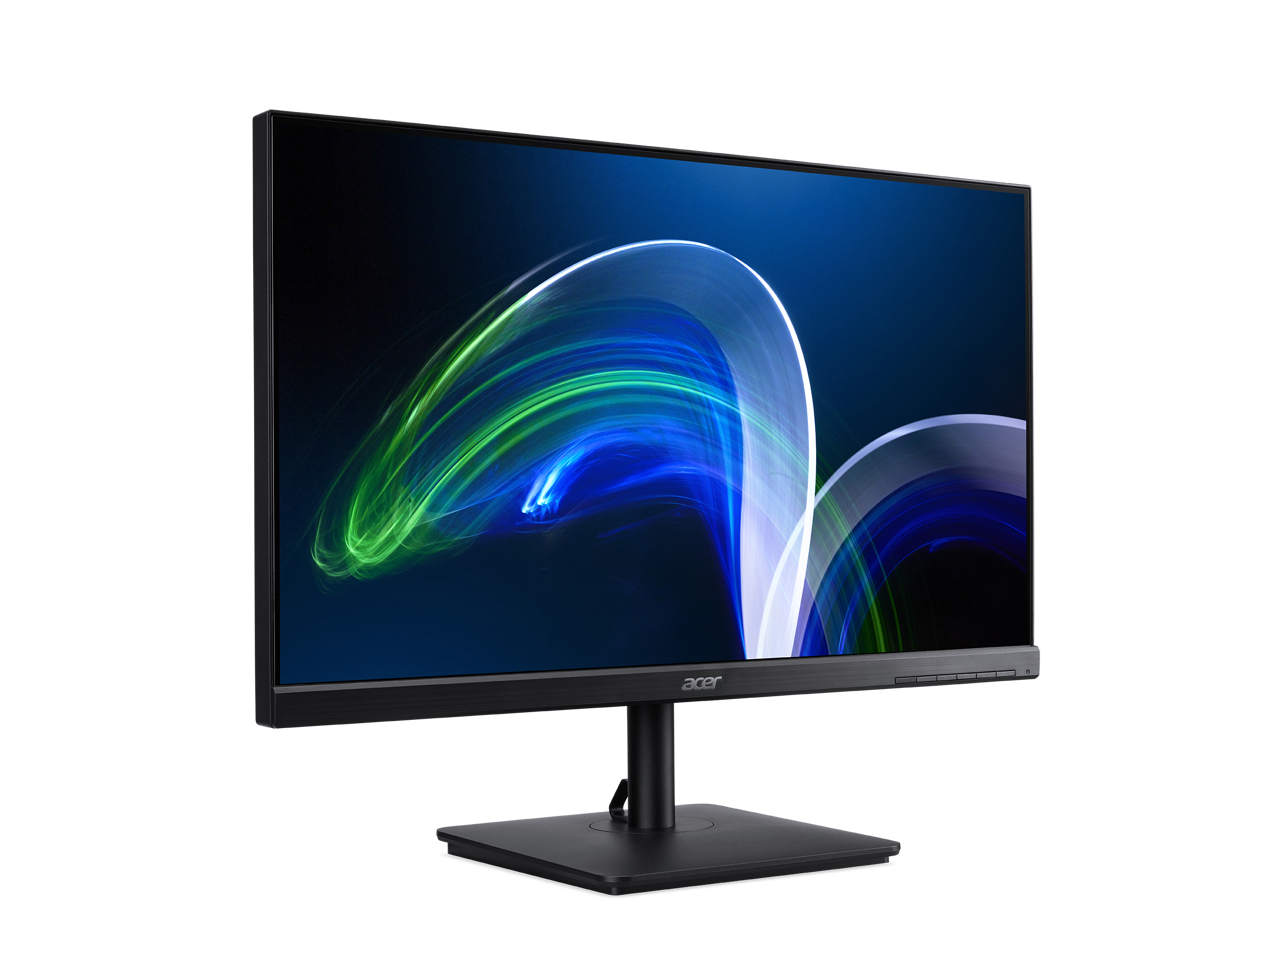 Acer VA241Y 24" (23.8" Viewable) Full HD LED LCD Monitor - 16:9 - Black - Vertical Alignment (VA) - 1920 x 1080 - 16.7 Million Colors - 250 Nit - 4 ms - 75 Hz Refresh Rate - HDMI - VGA - image 4 of 9